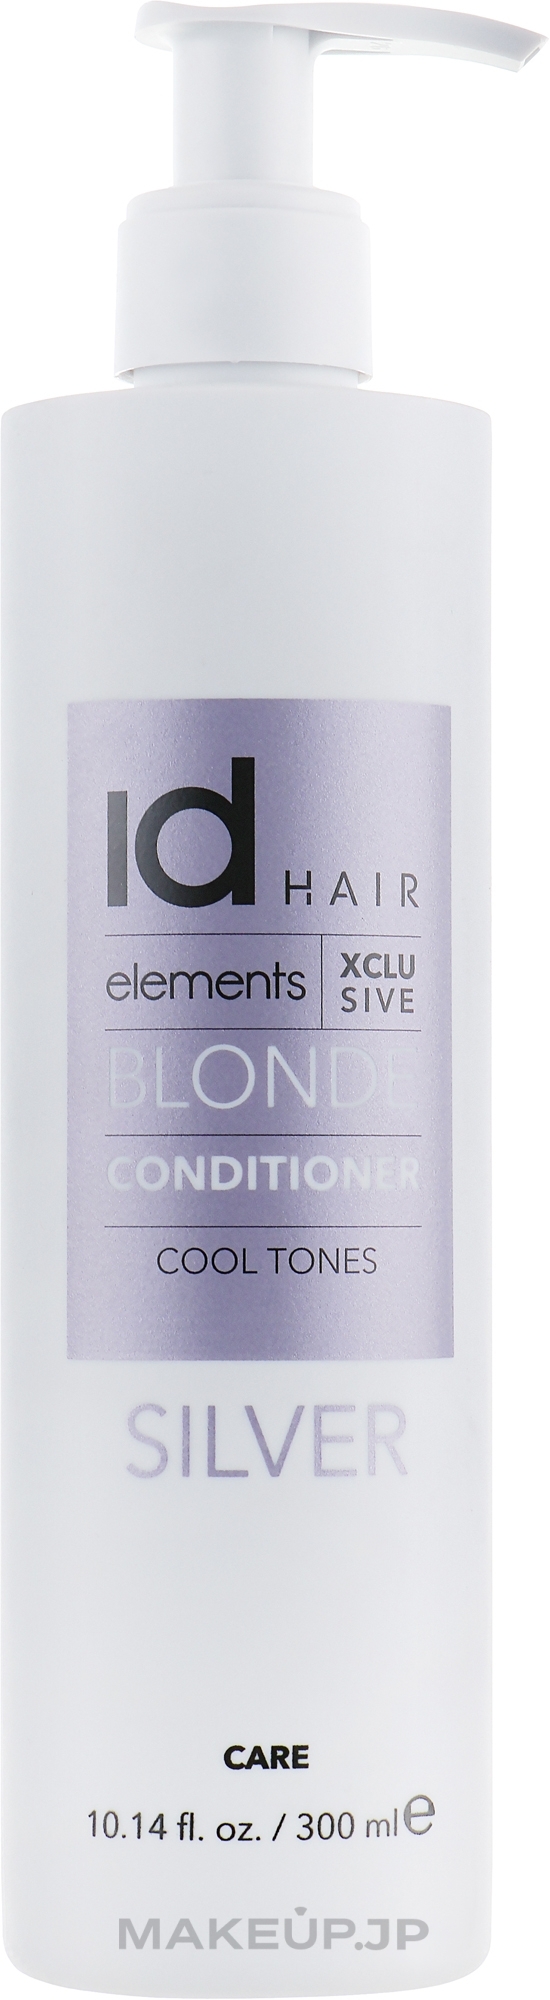 Bleached & Blonde Hair Conditioner - idHair Elements XCLS Blonde Silver Conditioner — photo 300 ml